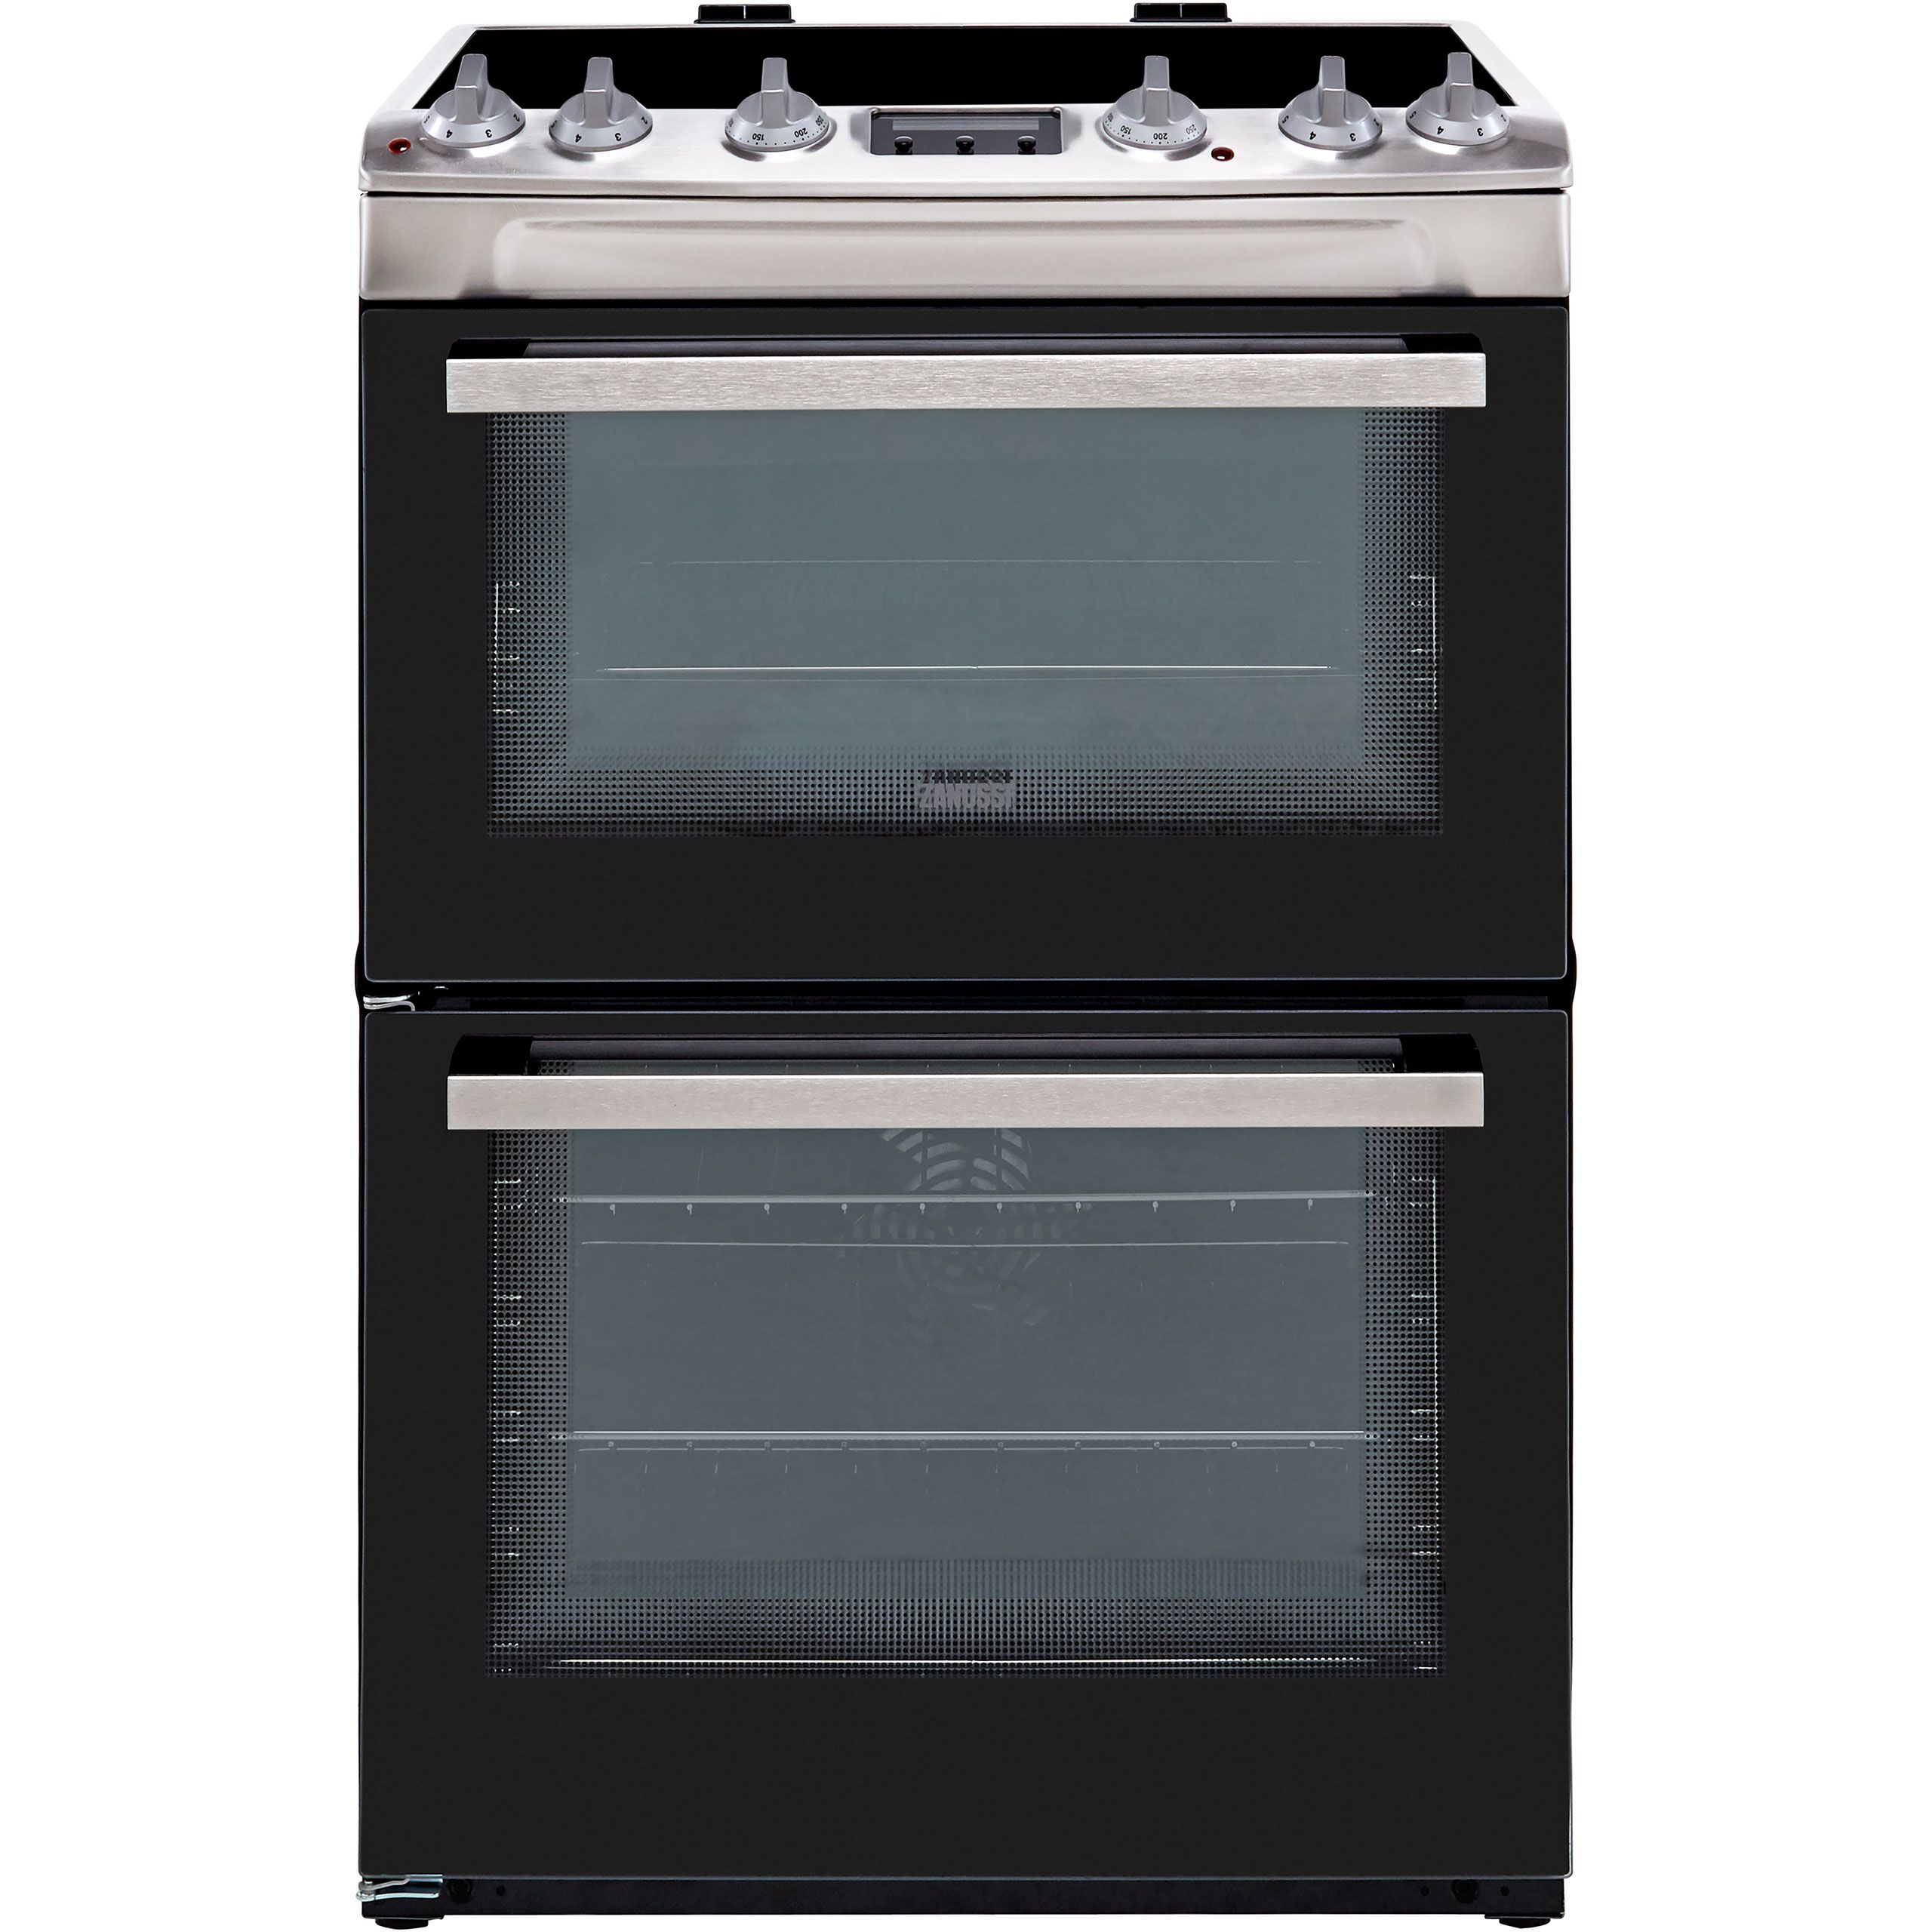 Zanussi ZCV66250XA 60cm Electric Cooker with Ceramic Hob - Stainless Steel - A/A Rated, Stainless Steel